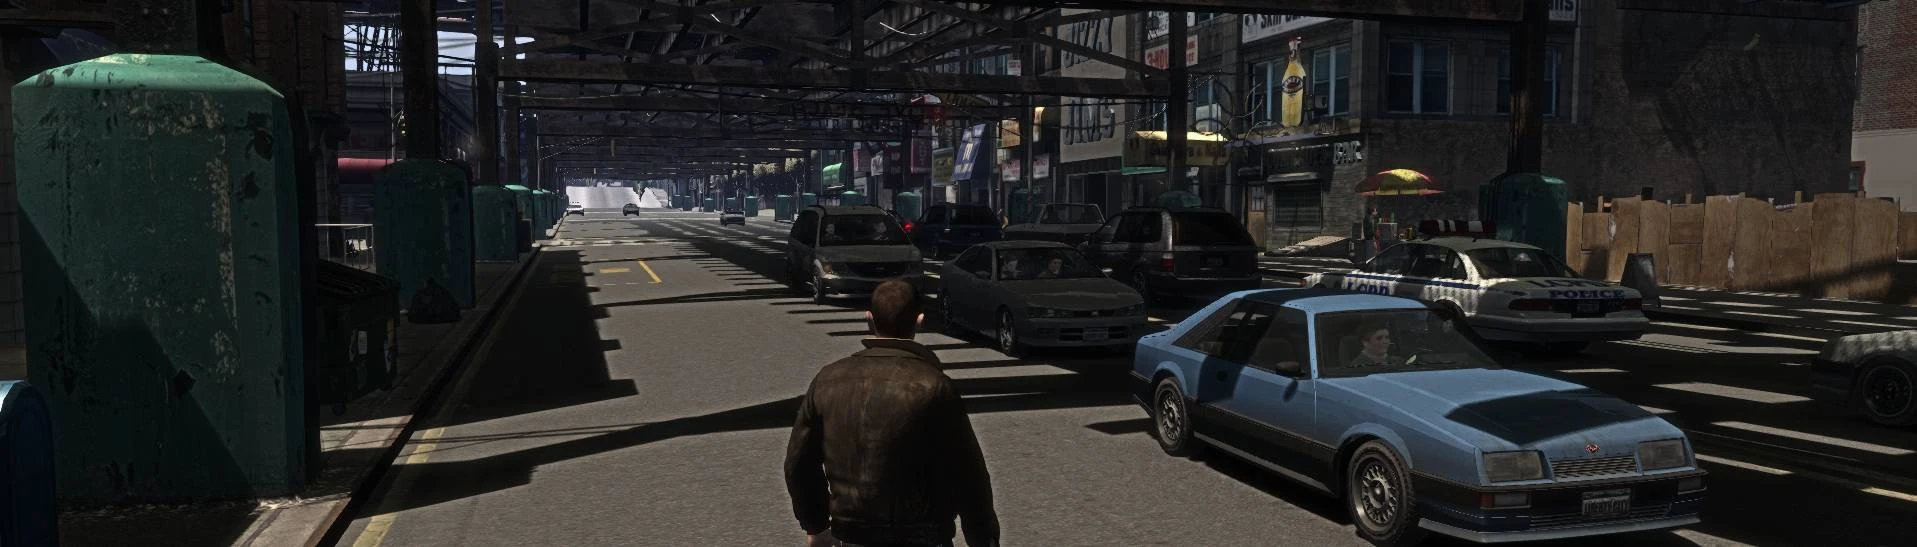 How To Download And Install GTA IV I GTA 4 download PC 2023 